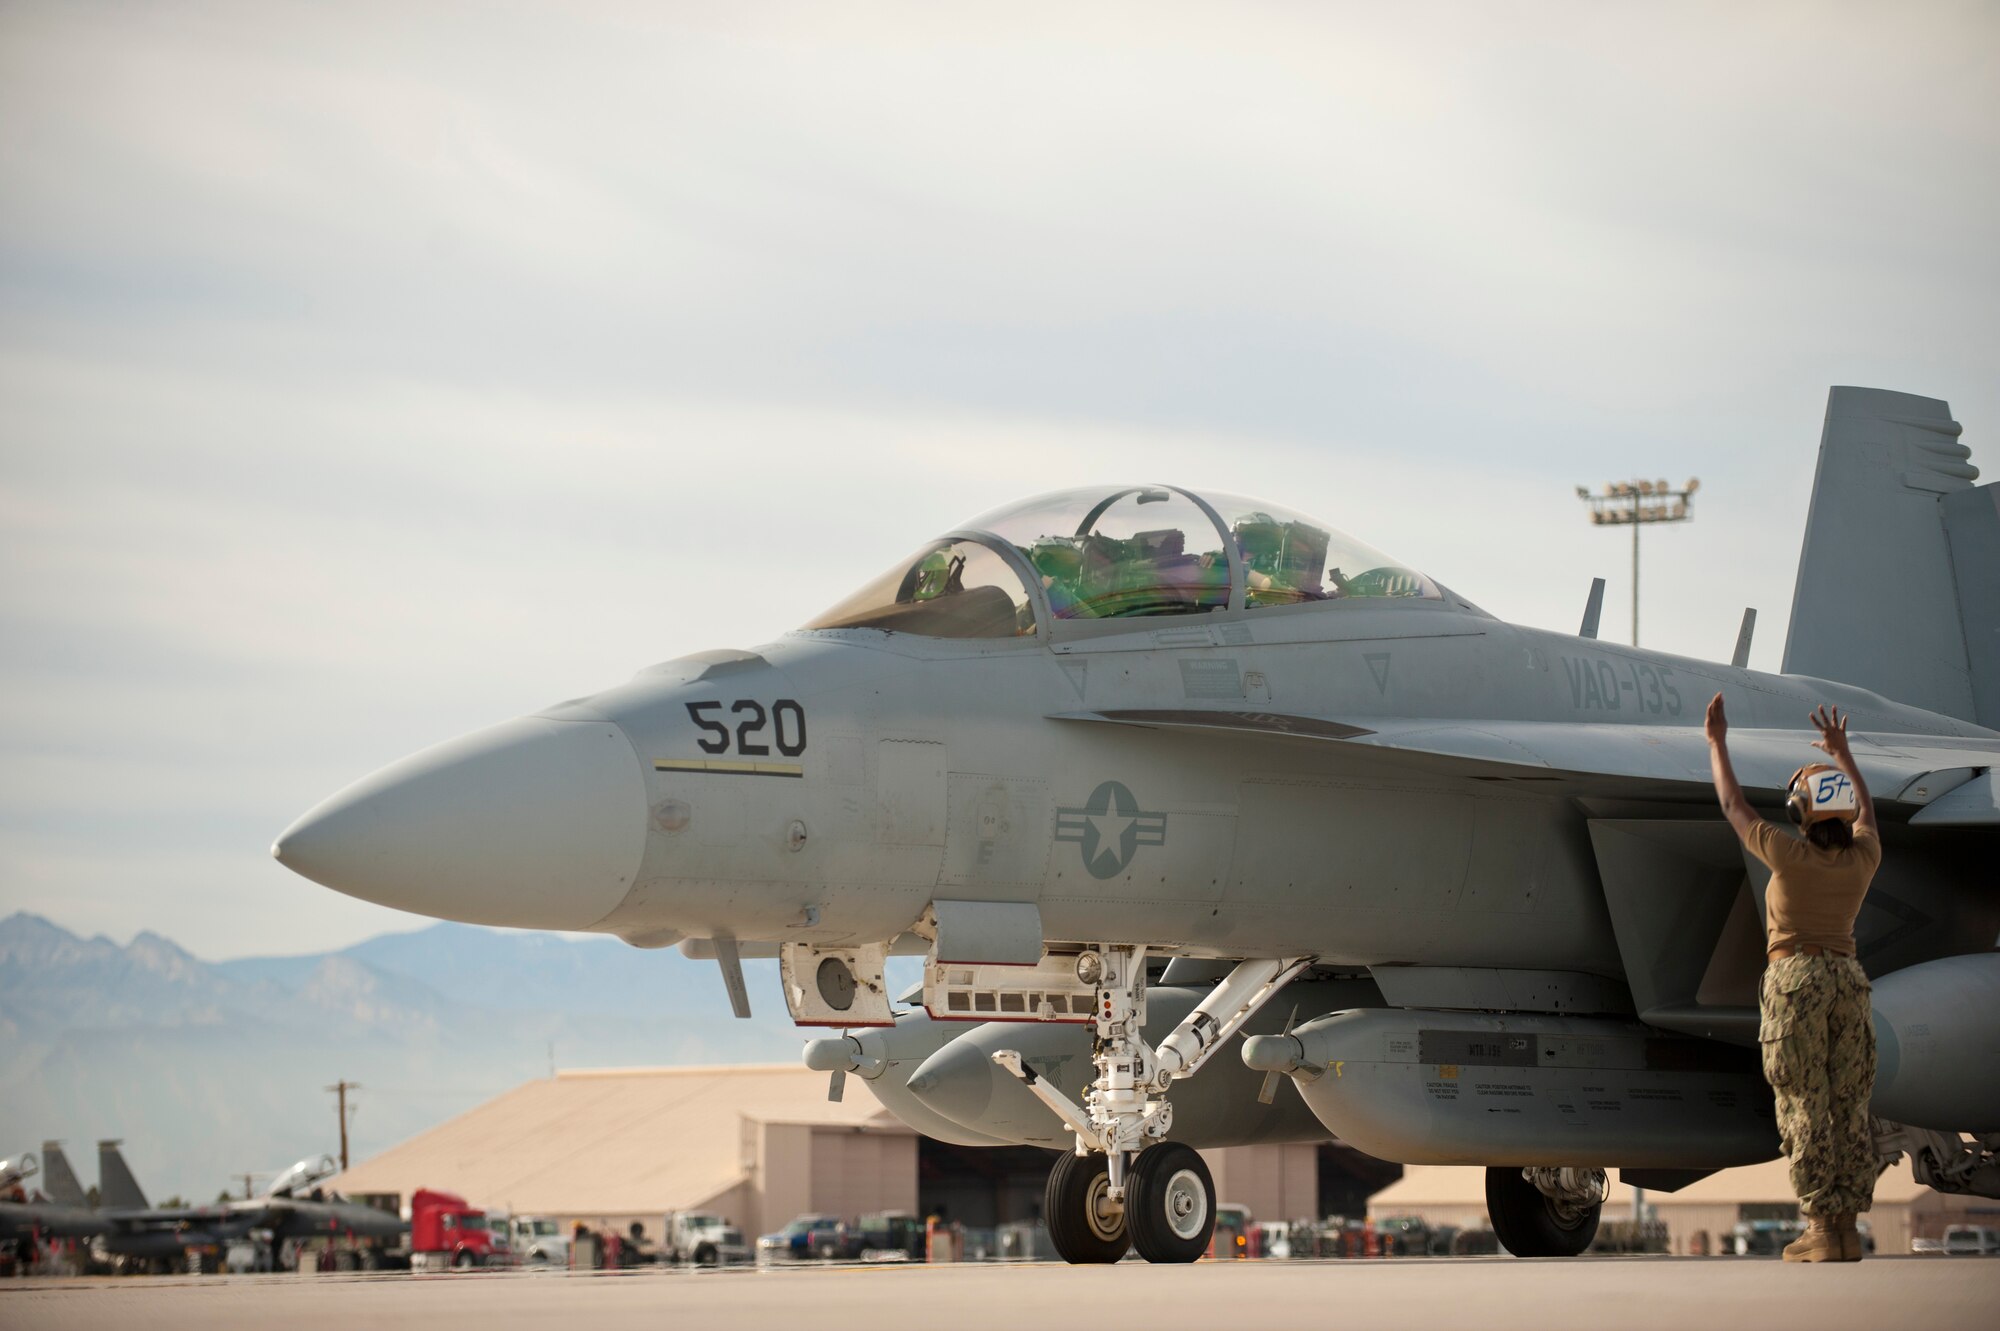 U.S. Navy Petty Officer 3rd Class Micah Smith, 135th Electronic Attack Squadron flight captain, Naval Air Station Whidbey Island, Wash., directs the pilot of an EA-18G Growler out of a parking spot prior to a training mission Jan. 29, 2014, at Nellis Air Force base. Nev. The Boeing EA-18G Growler is an American carrier-based electronic warfare aircraft, a specialized version of the two-seat F/A-18F Super Hornet. Red Flag gives aircrews and air support operations service members from various airframes, military services and allied countries an opportunity to integrate and practice combat operations. (U.S. Air Force photo by Airman 1st Class Joshua Kleinholz)